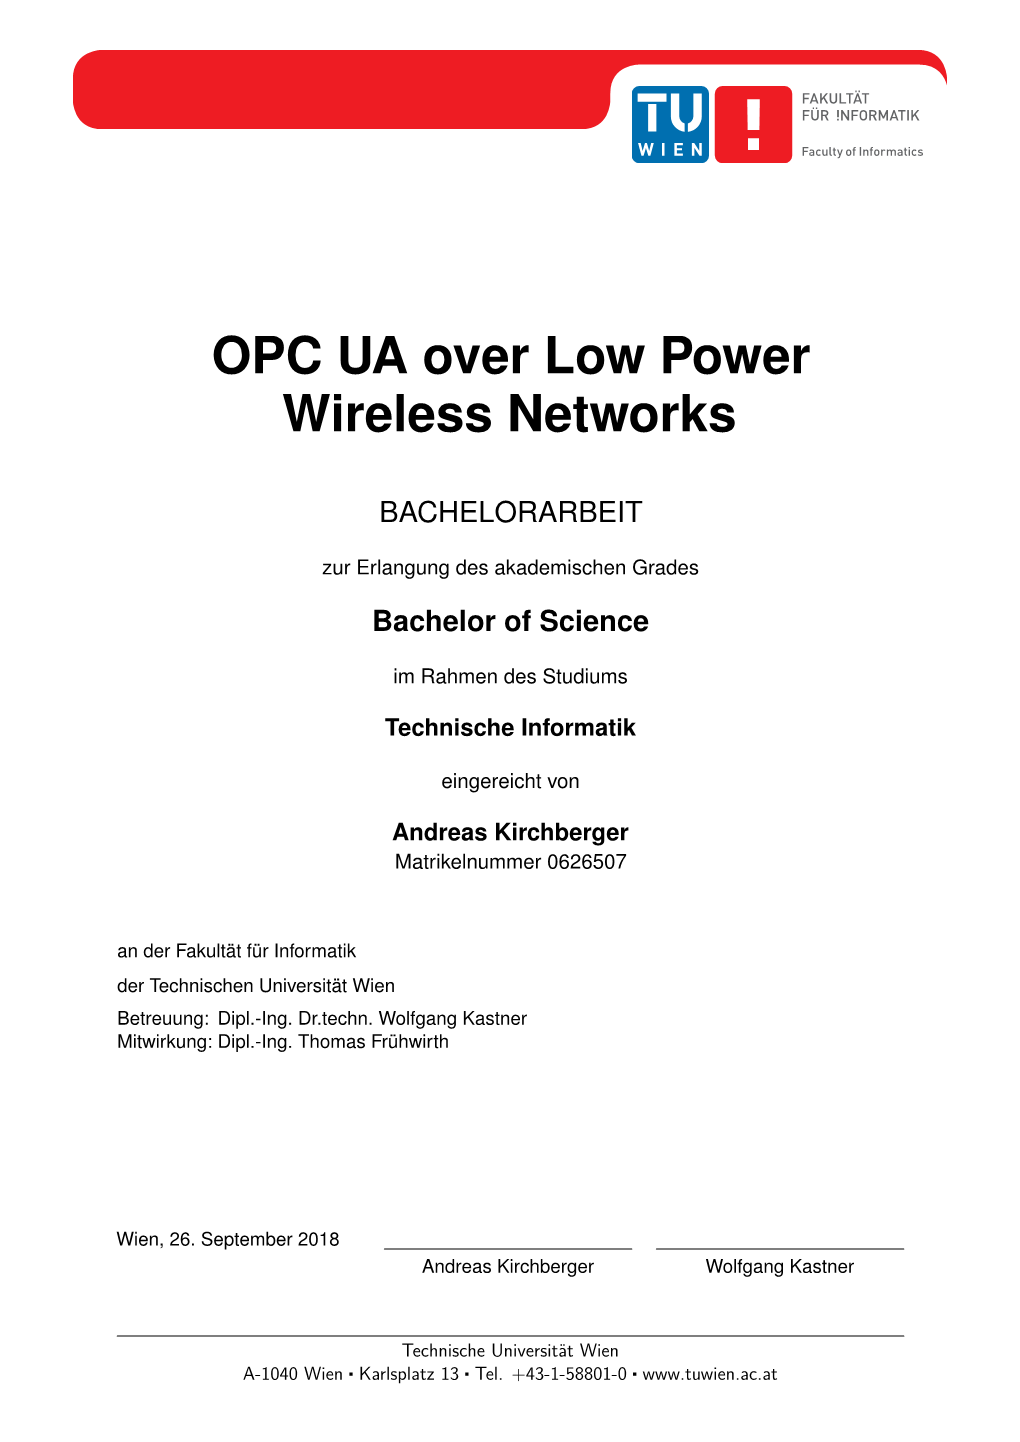 OPC UA Over Low Power Wireless Networks